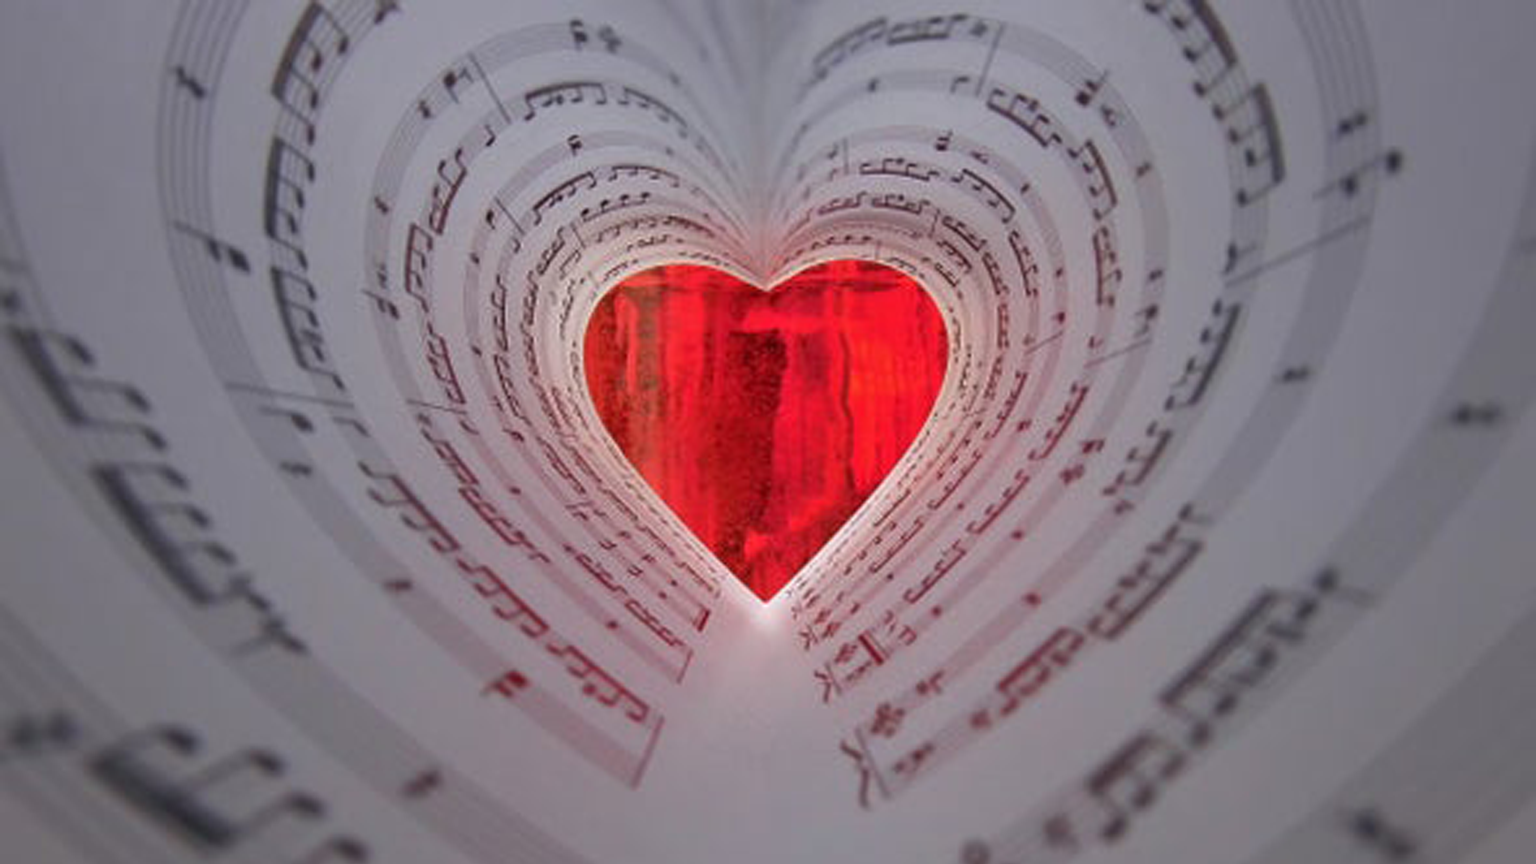 Sheet music wrapped to form a heart. Credit: Dragan Todorovic Getty Images